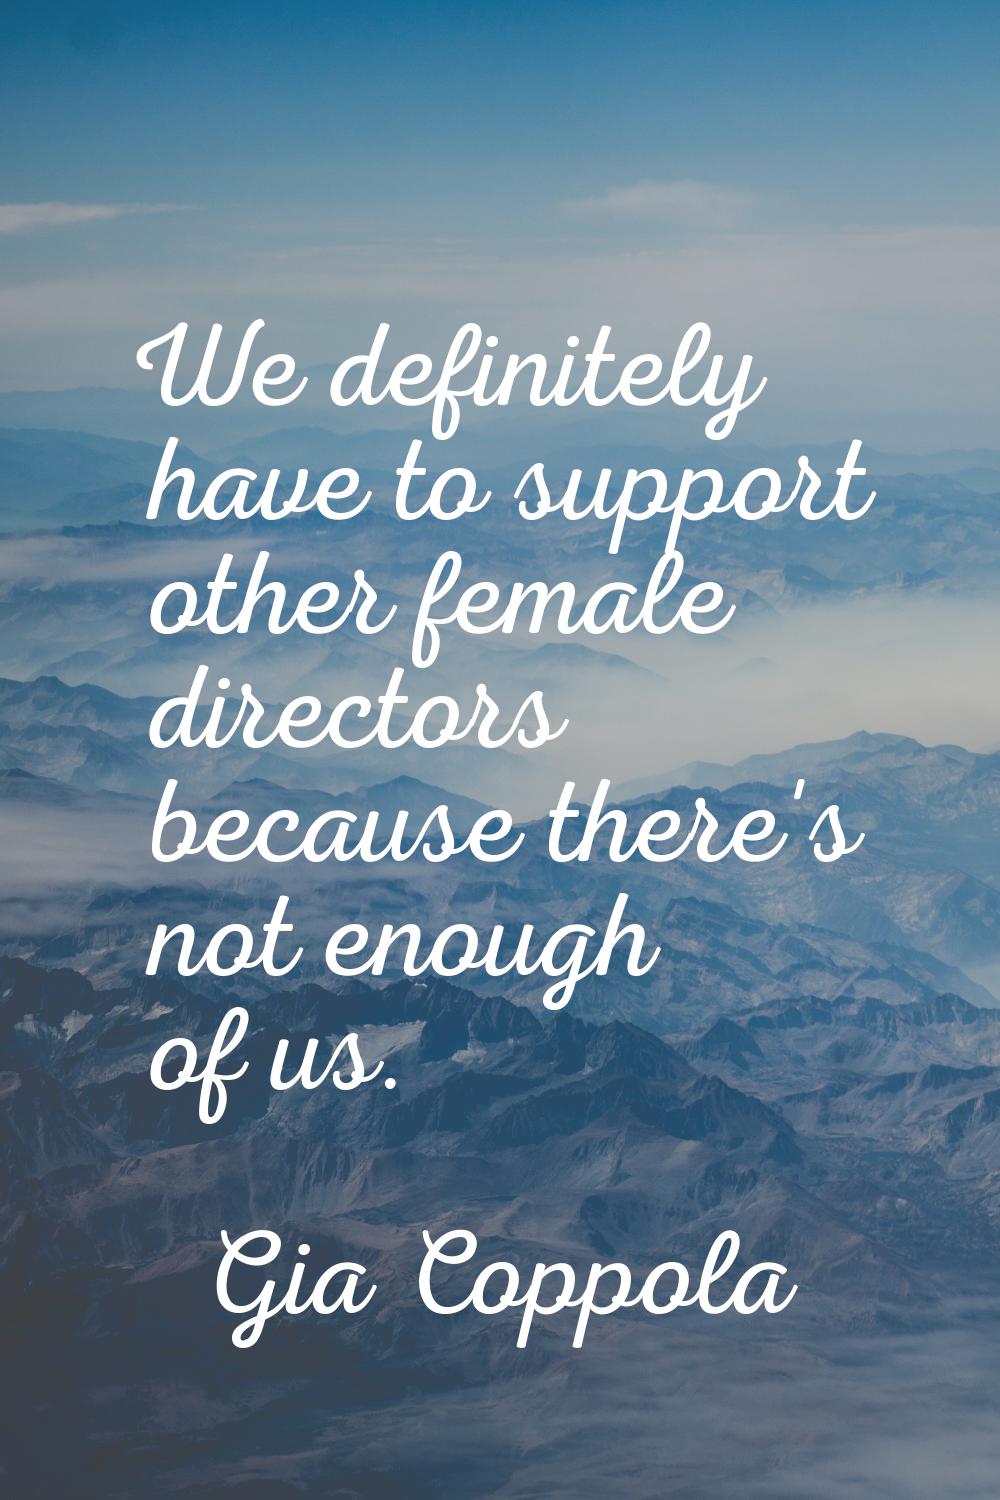 We definitely have to support other female directors because there's not enough of us.